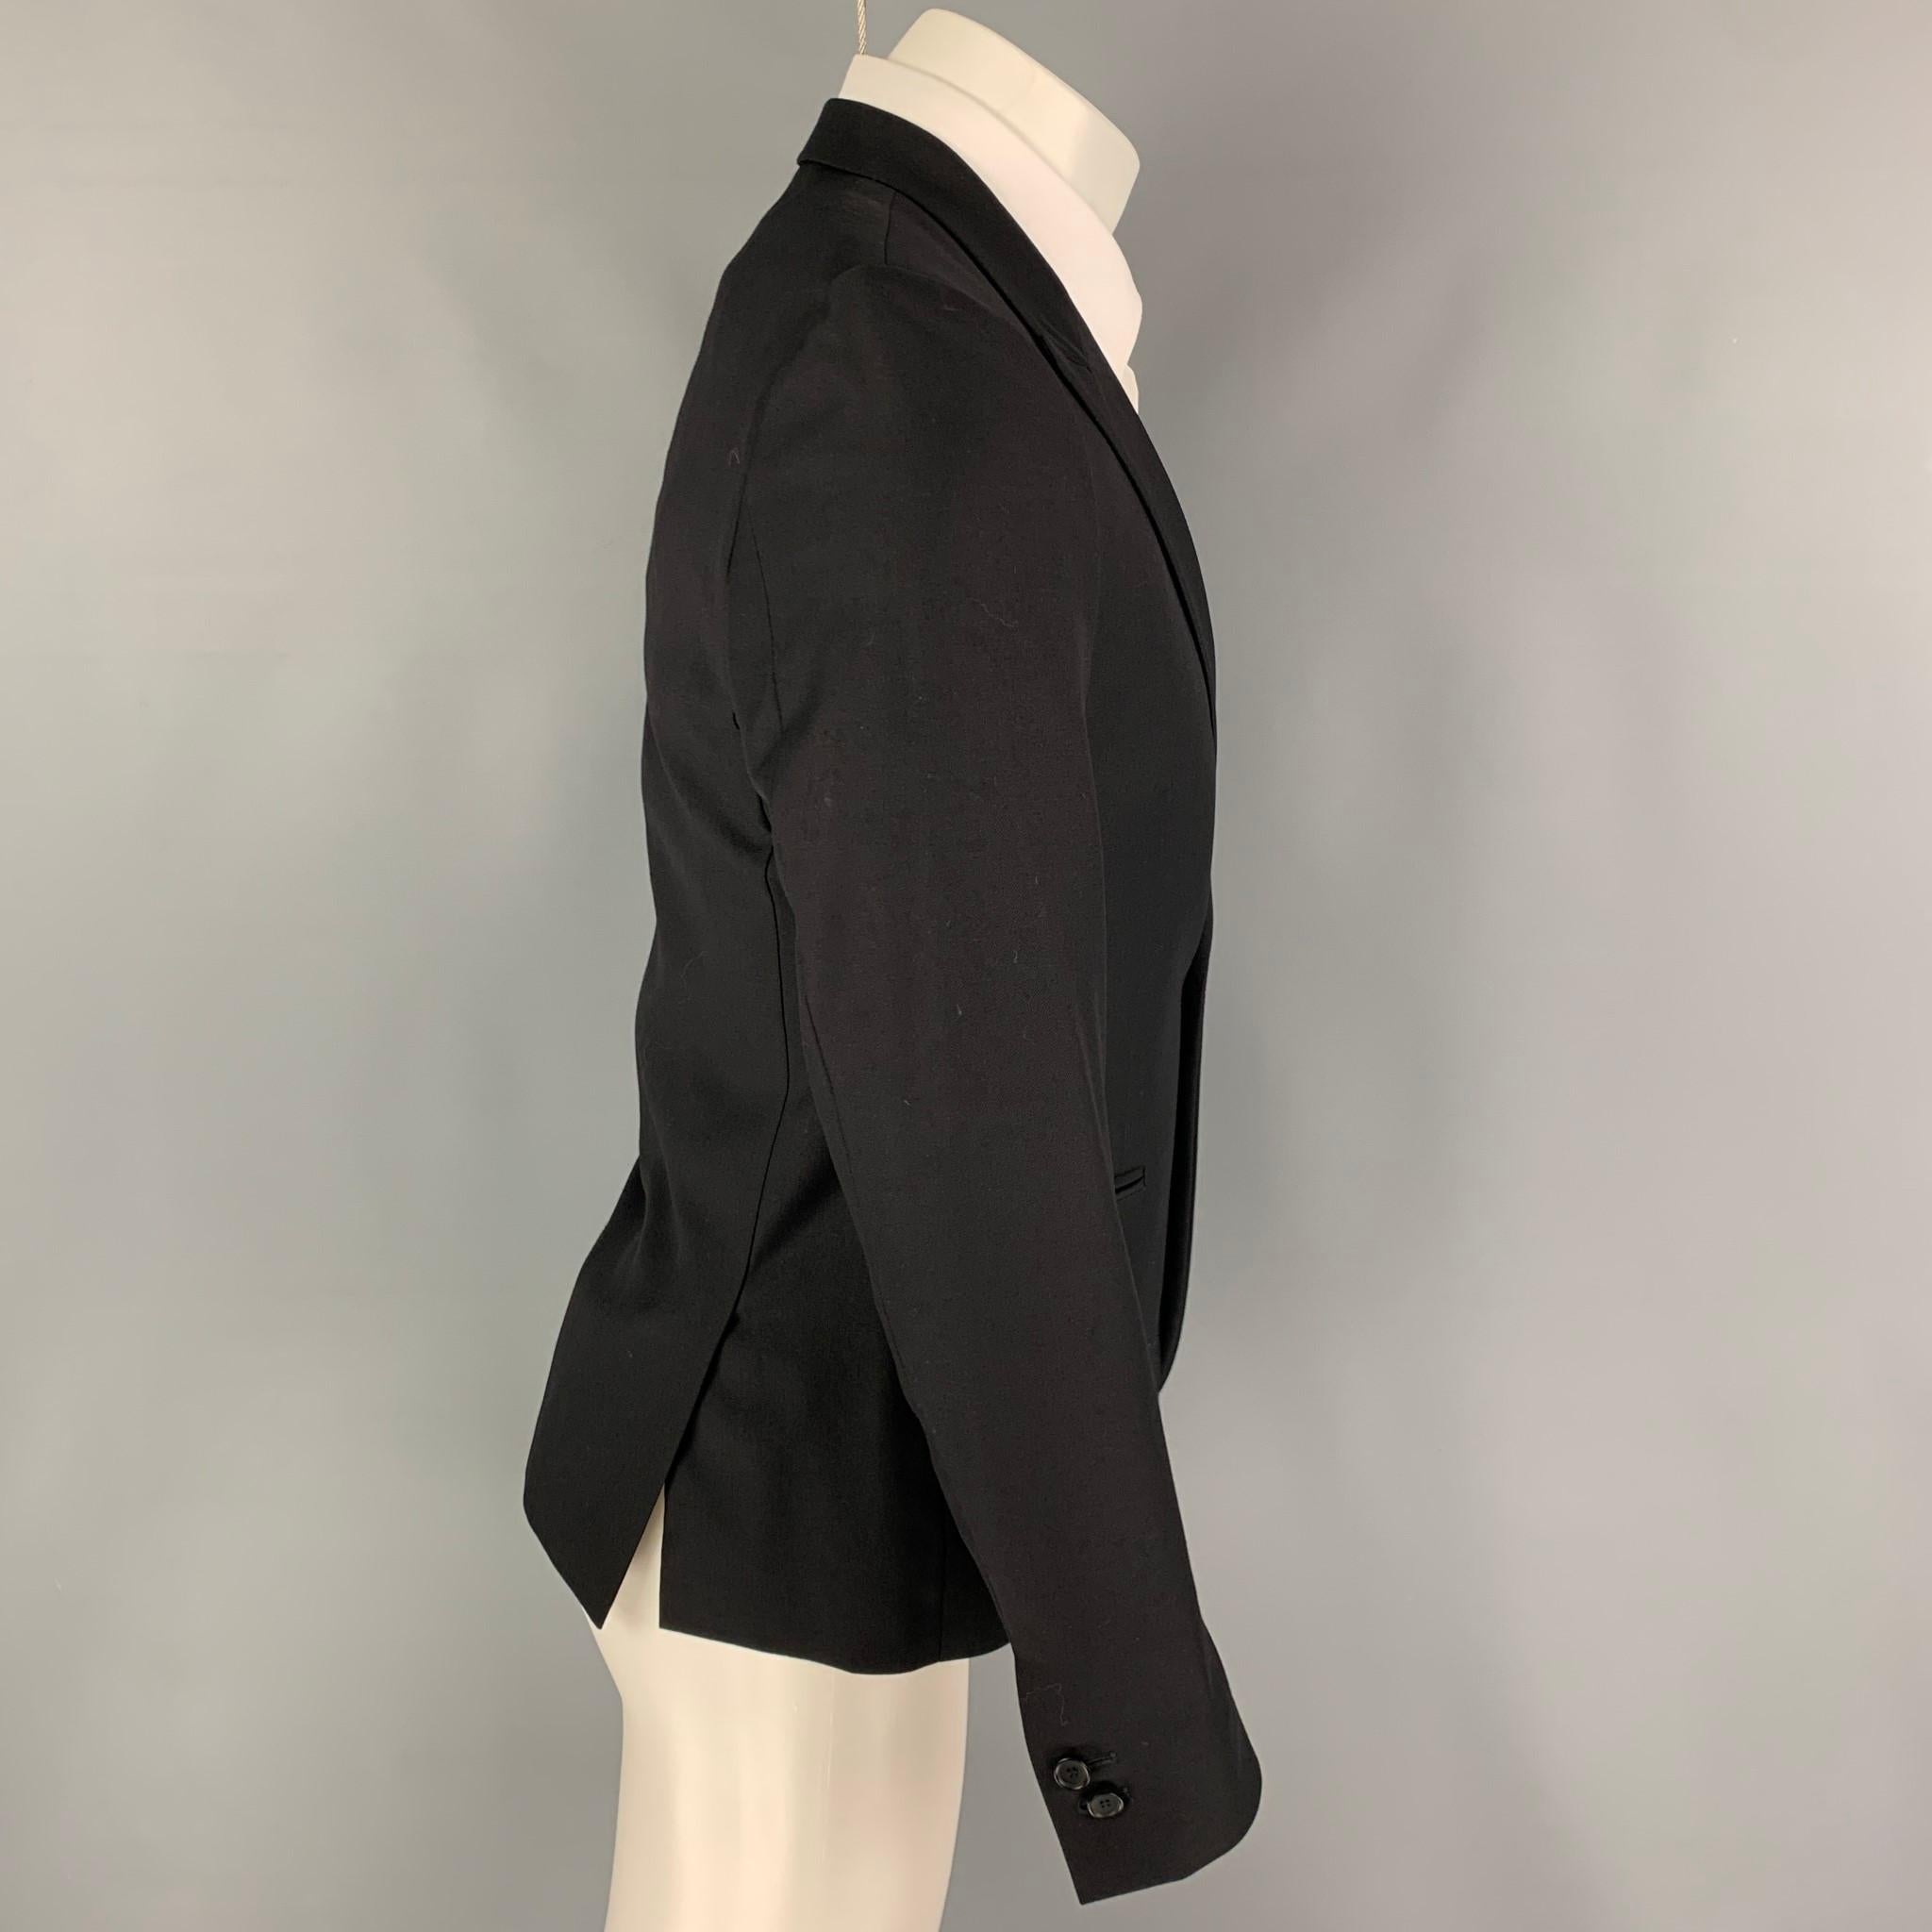 THE KOOPLES sport coat comes in a black wool with a full liner featuring a peak lapel, slit pockets, double back vent, and a single button closure. 

Excellent Pre-Owned Condition.
Marked: 46

Measurements:

Shoulder: 16 in.
Chest: 36 in.
Sleeve: 25